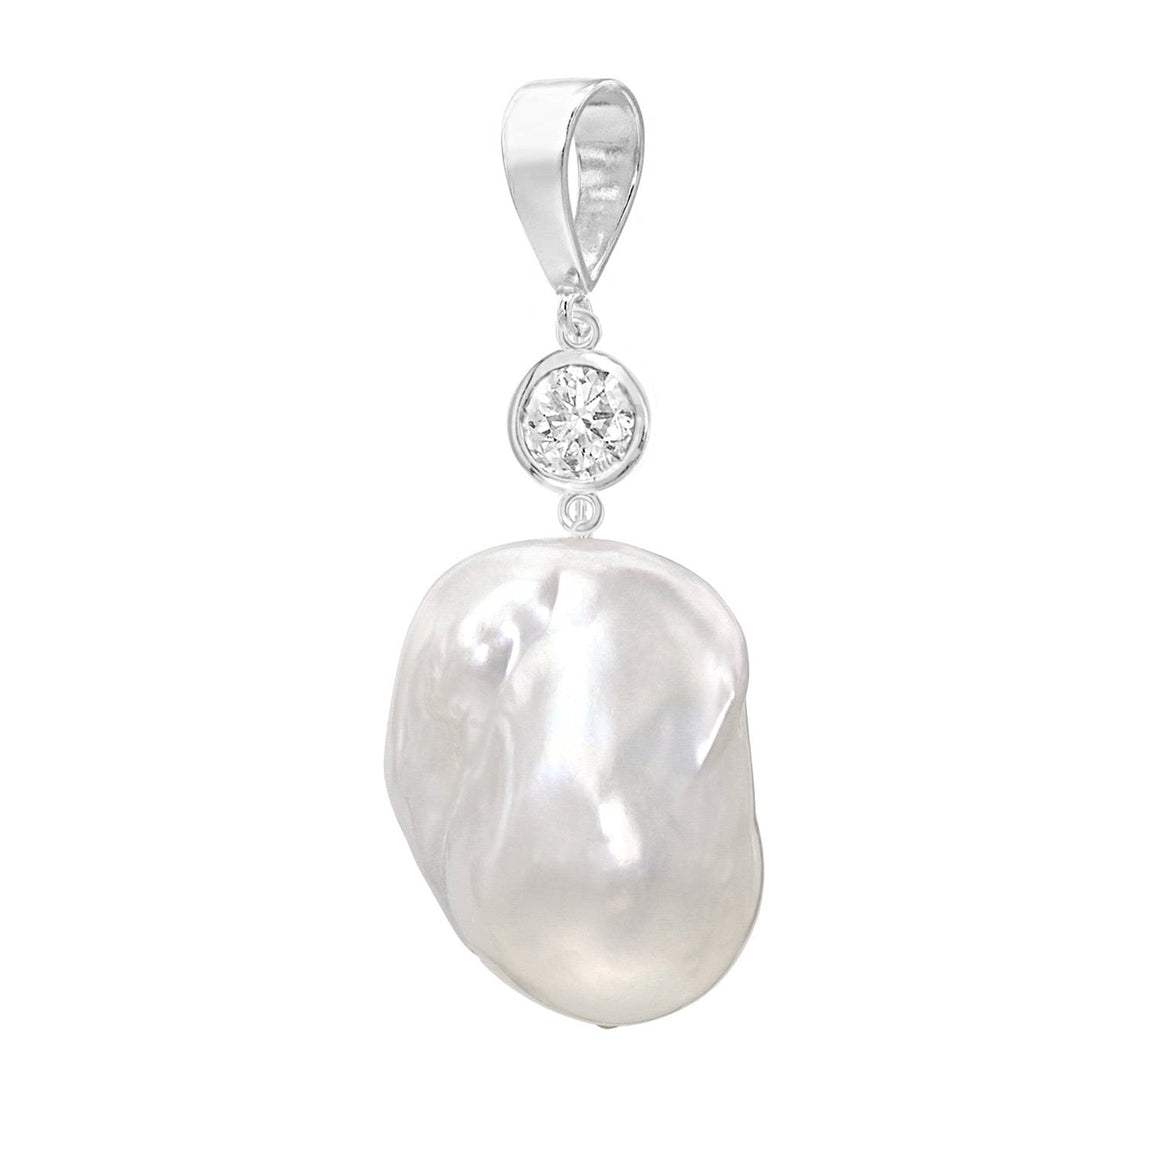 Jean Joaillerie Large White Baroque Freshwater Pearl And 1 Carat Diamond Charm Pendant In Sterling Silver